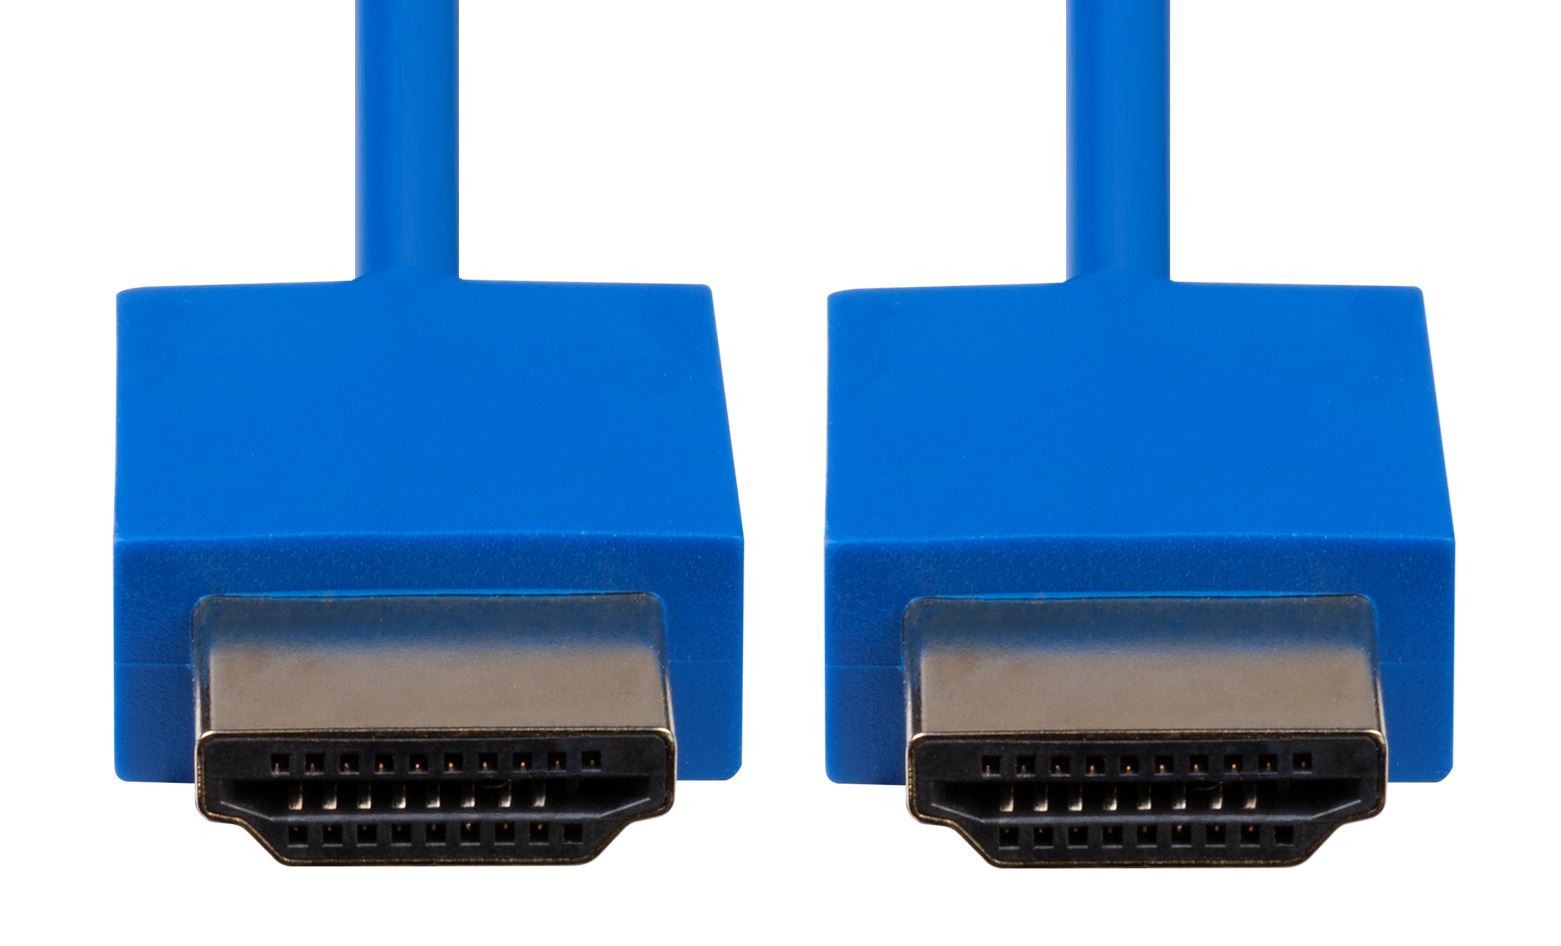 DYNAMIX_1M_HDMI_BLUE_Nano_High_Speed_With_Ethernet_Cable._Designed_for_UHD_Display_up_to_4K2K@60Hz._Slimline_Robust_Cable._Supports_CEC_2.0,_3D,_&_ARC._Supports_Up_to_32_Audio_Channels. 691